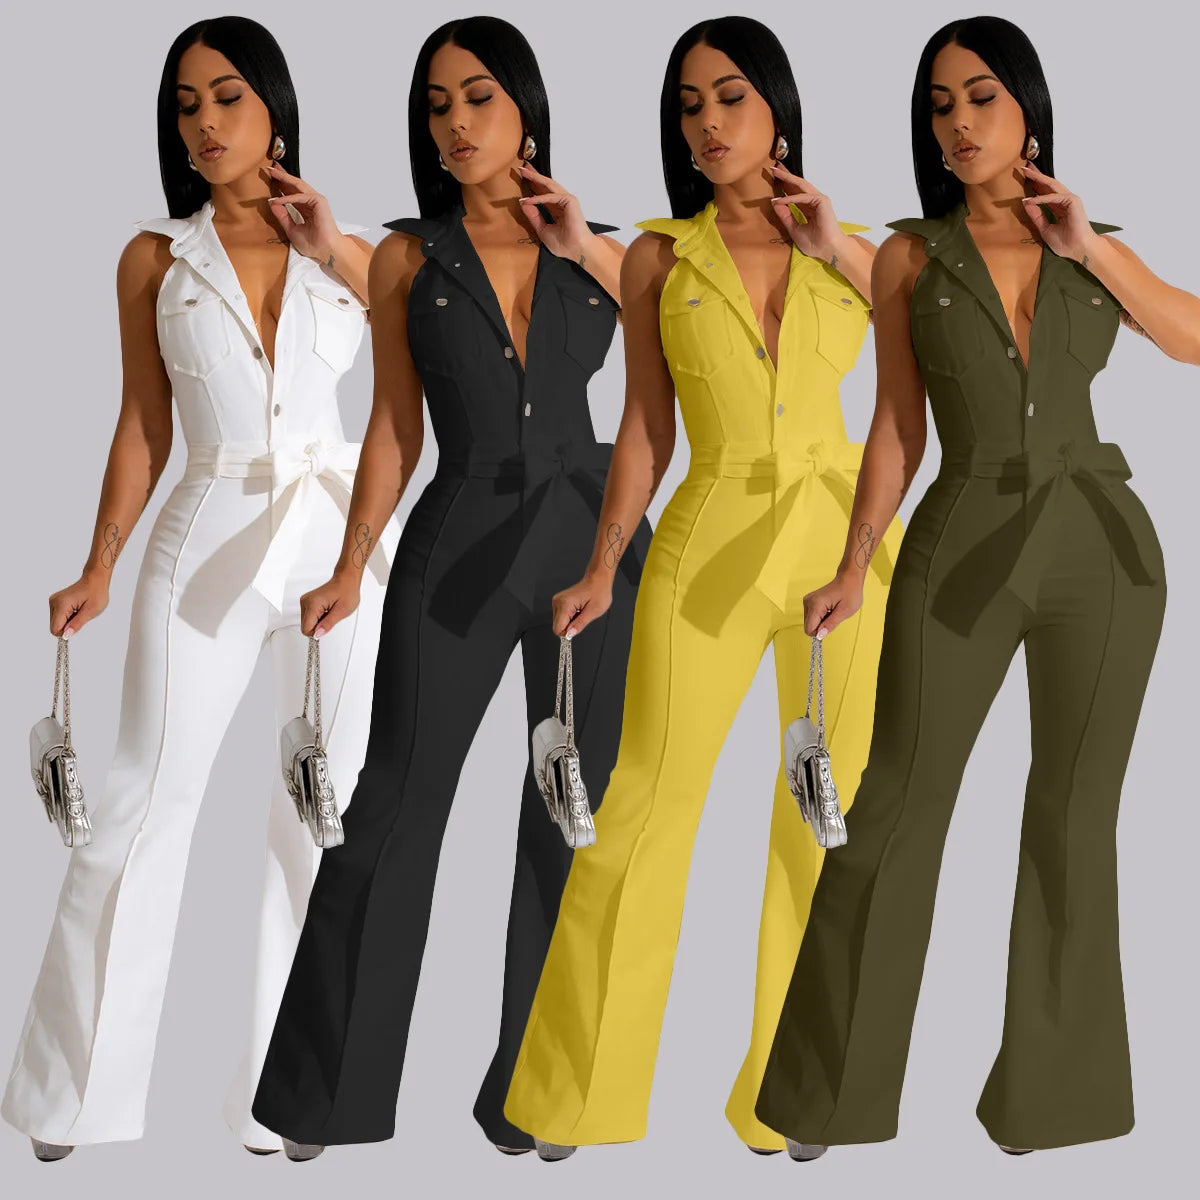 Spring/Summer Women's Clothing Solid Color Sleeveless Jumpsuit Fashion Wide Leg Pants Sexy Single-Breasted Jumpsuit With Belt